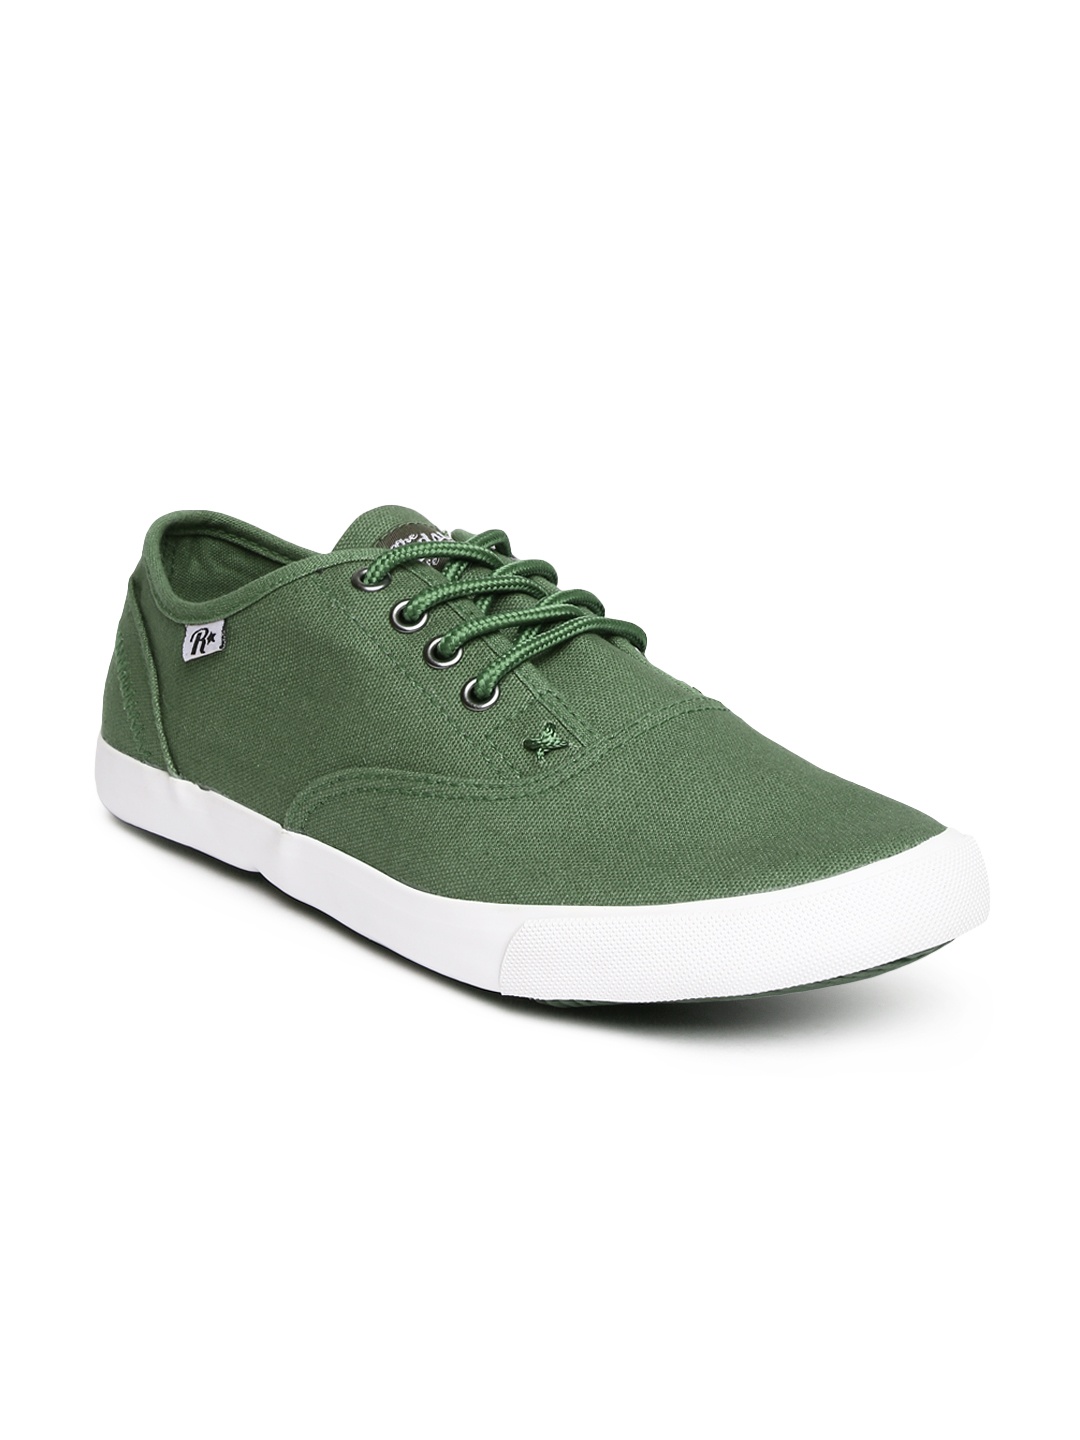 Myntra Roadster Men Olive Green Casual Shoes 869830 | Buy Myntra ...